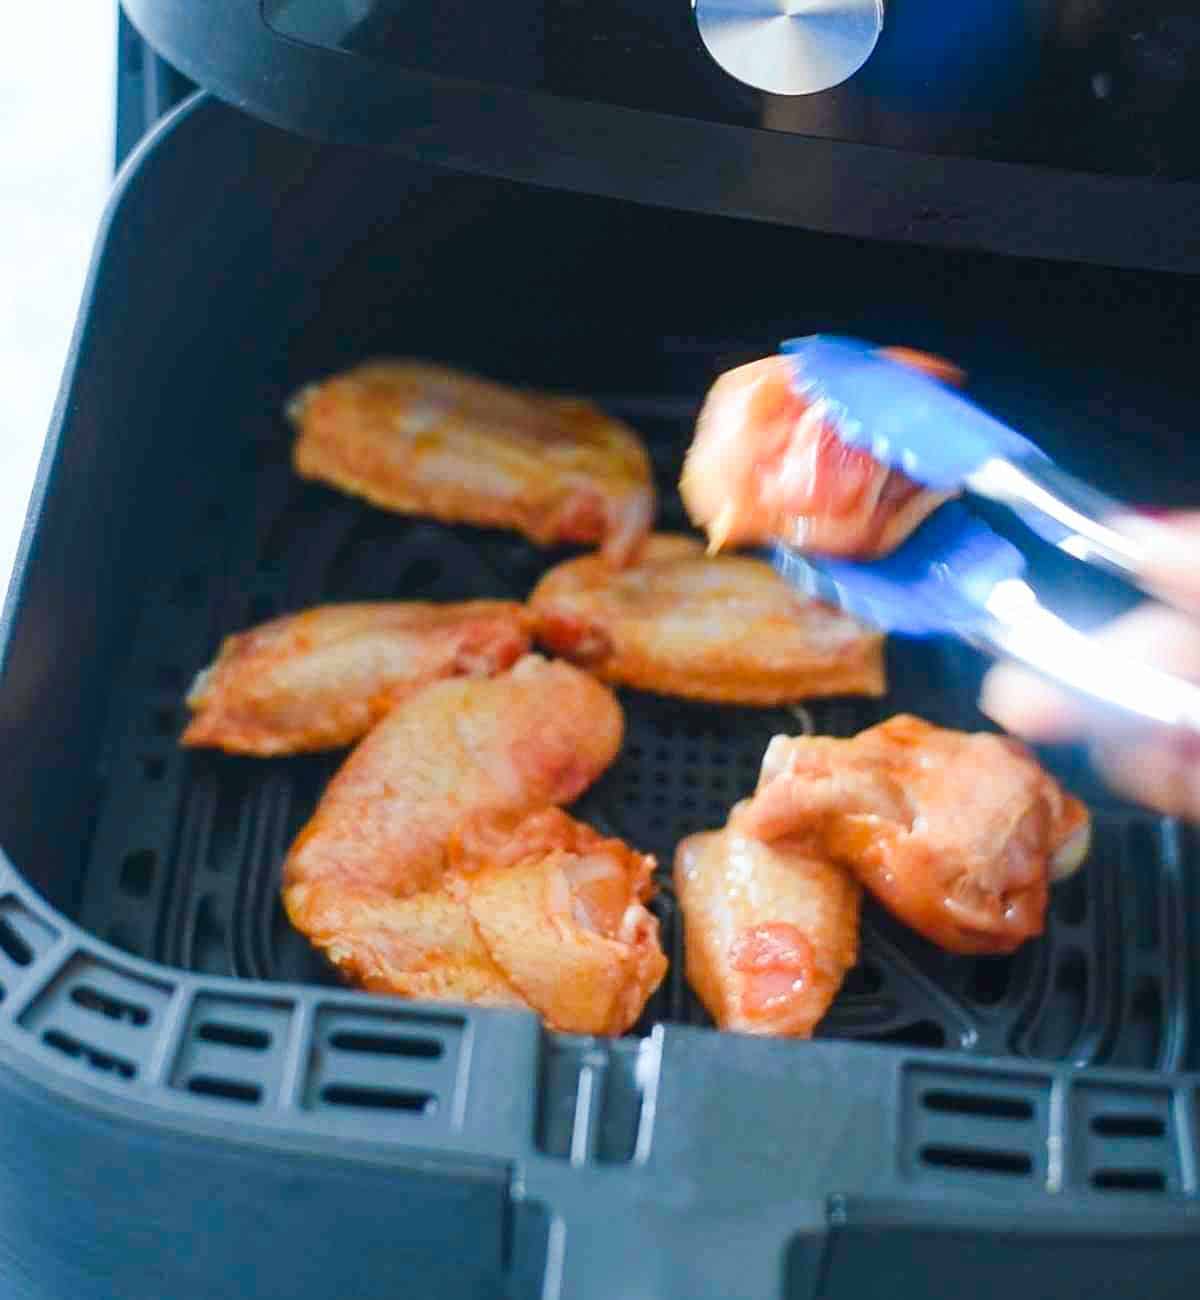 tongs holding chicken wings in an air fryer basket